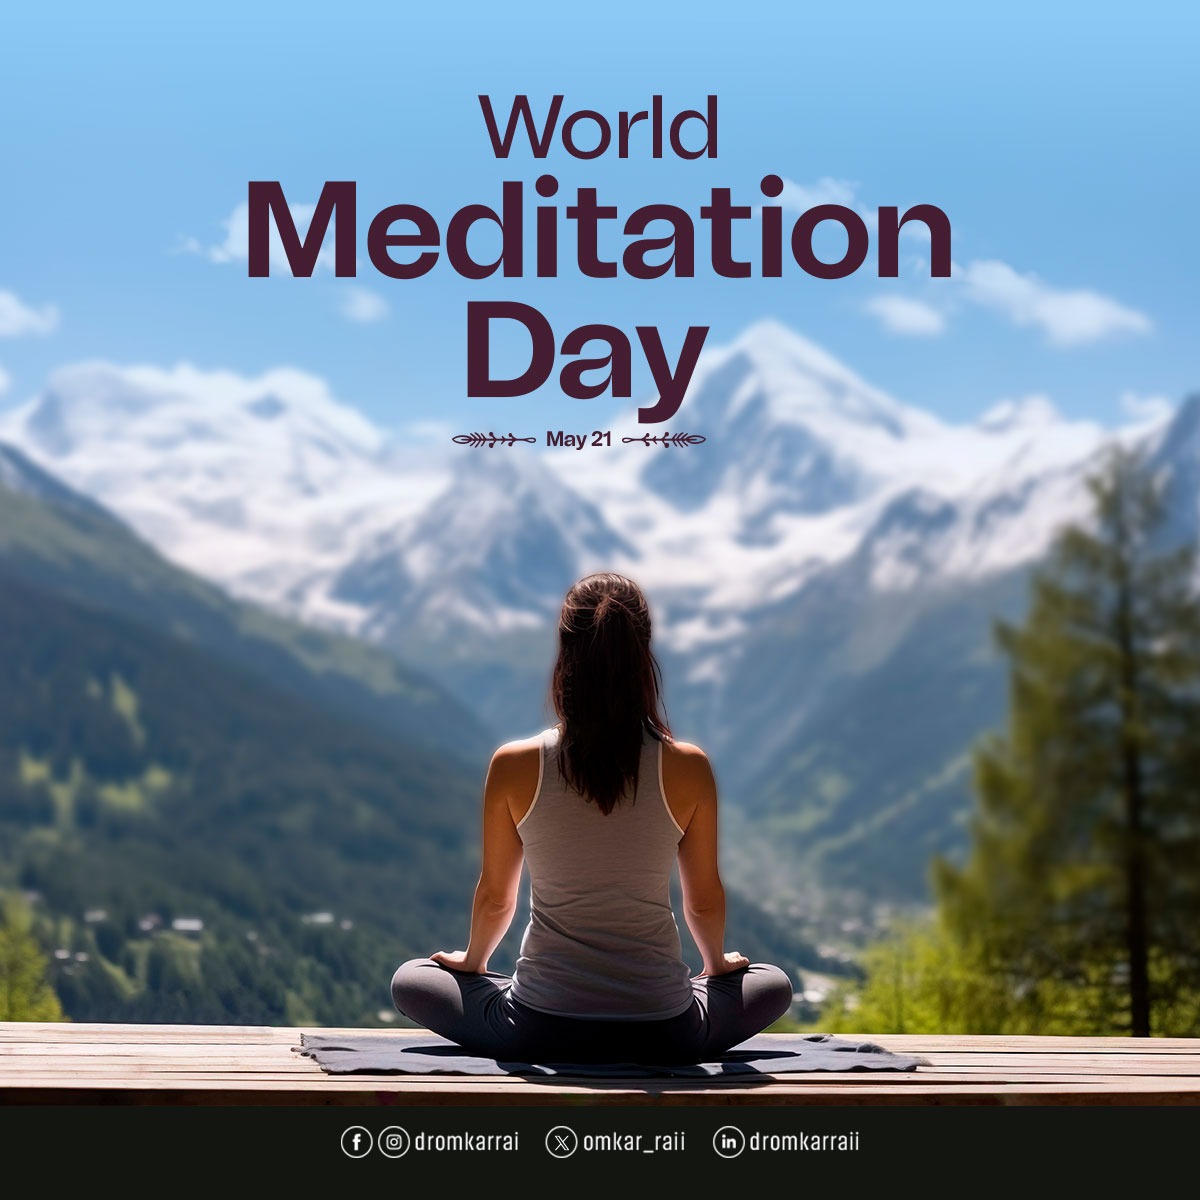 According to the UN, depression is ranked third in the global burden of disease, and is projected to rank first in 2030. Meditation provides inner peace & strength, helping us to overcome all odds & connect with the divine. #WorldMeditationDay